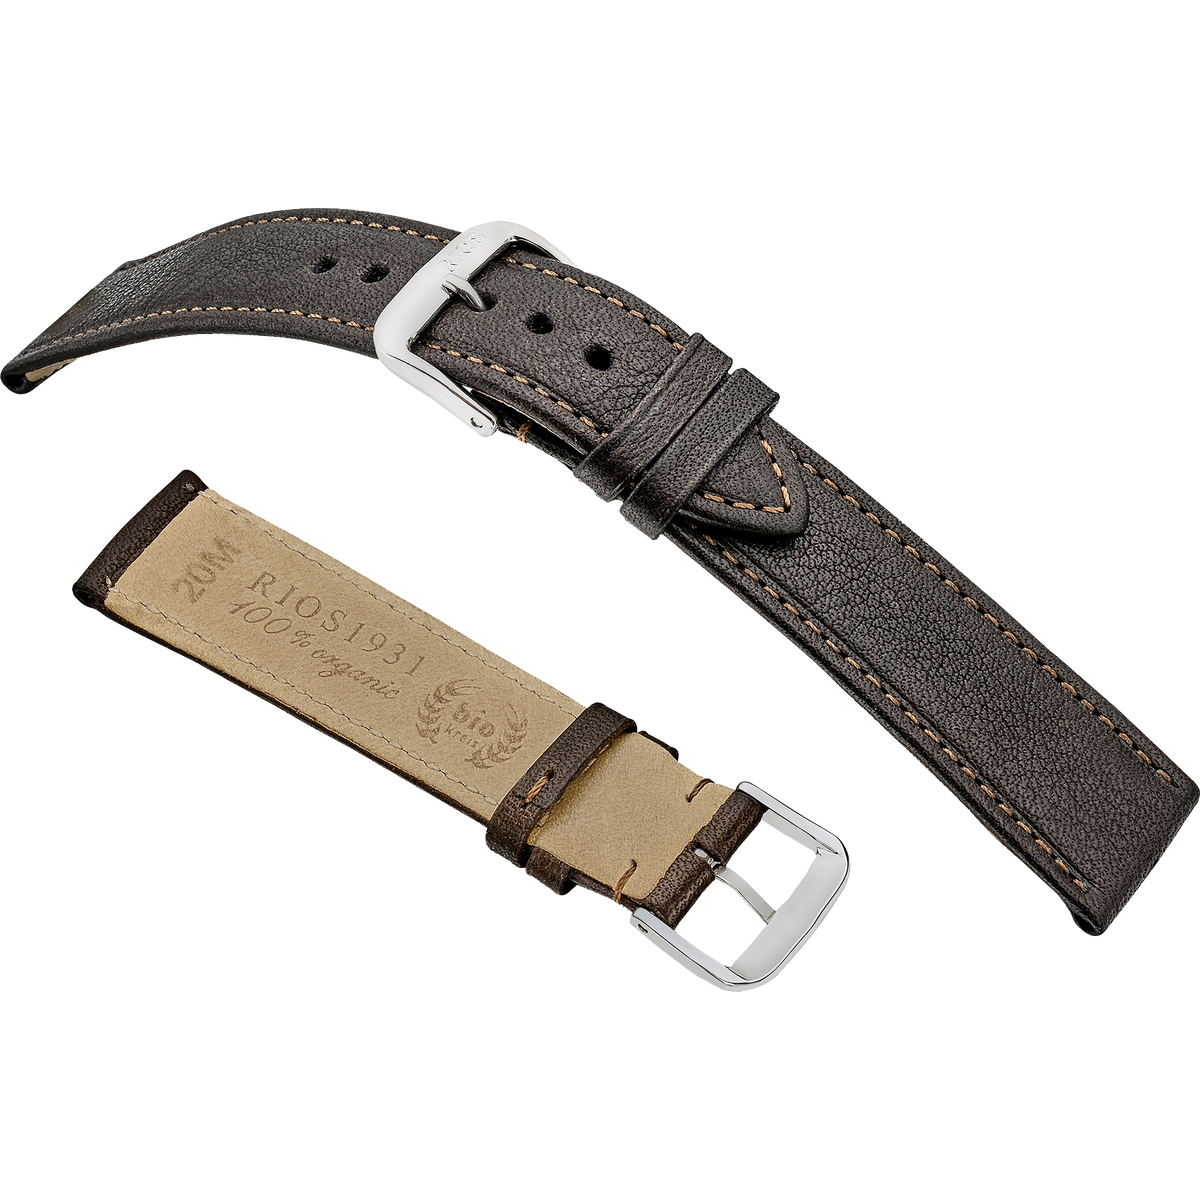 Rios 1931 Watch Bands - Waging - Genuine Certified Organic Leather